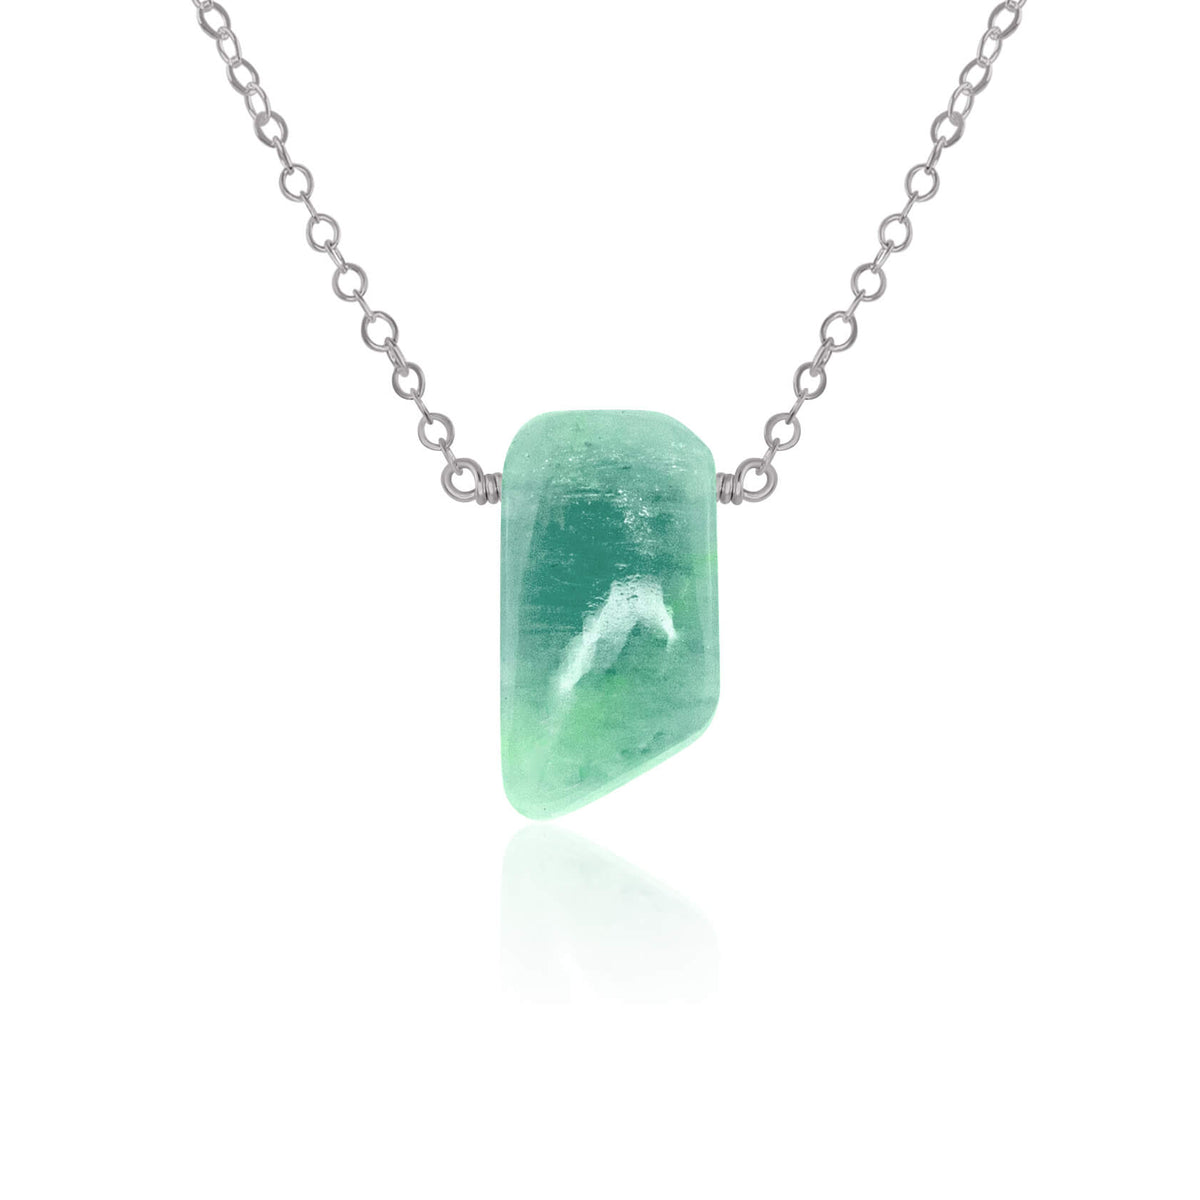 Small Smooth Slab Point Necklace - Amazonite - Stainless Steel - Luna Tide Handmade Jewellery